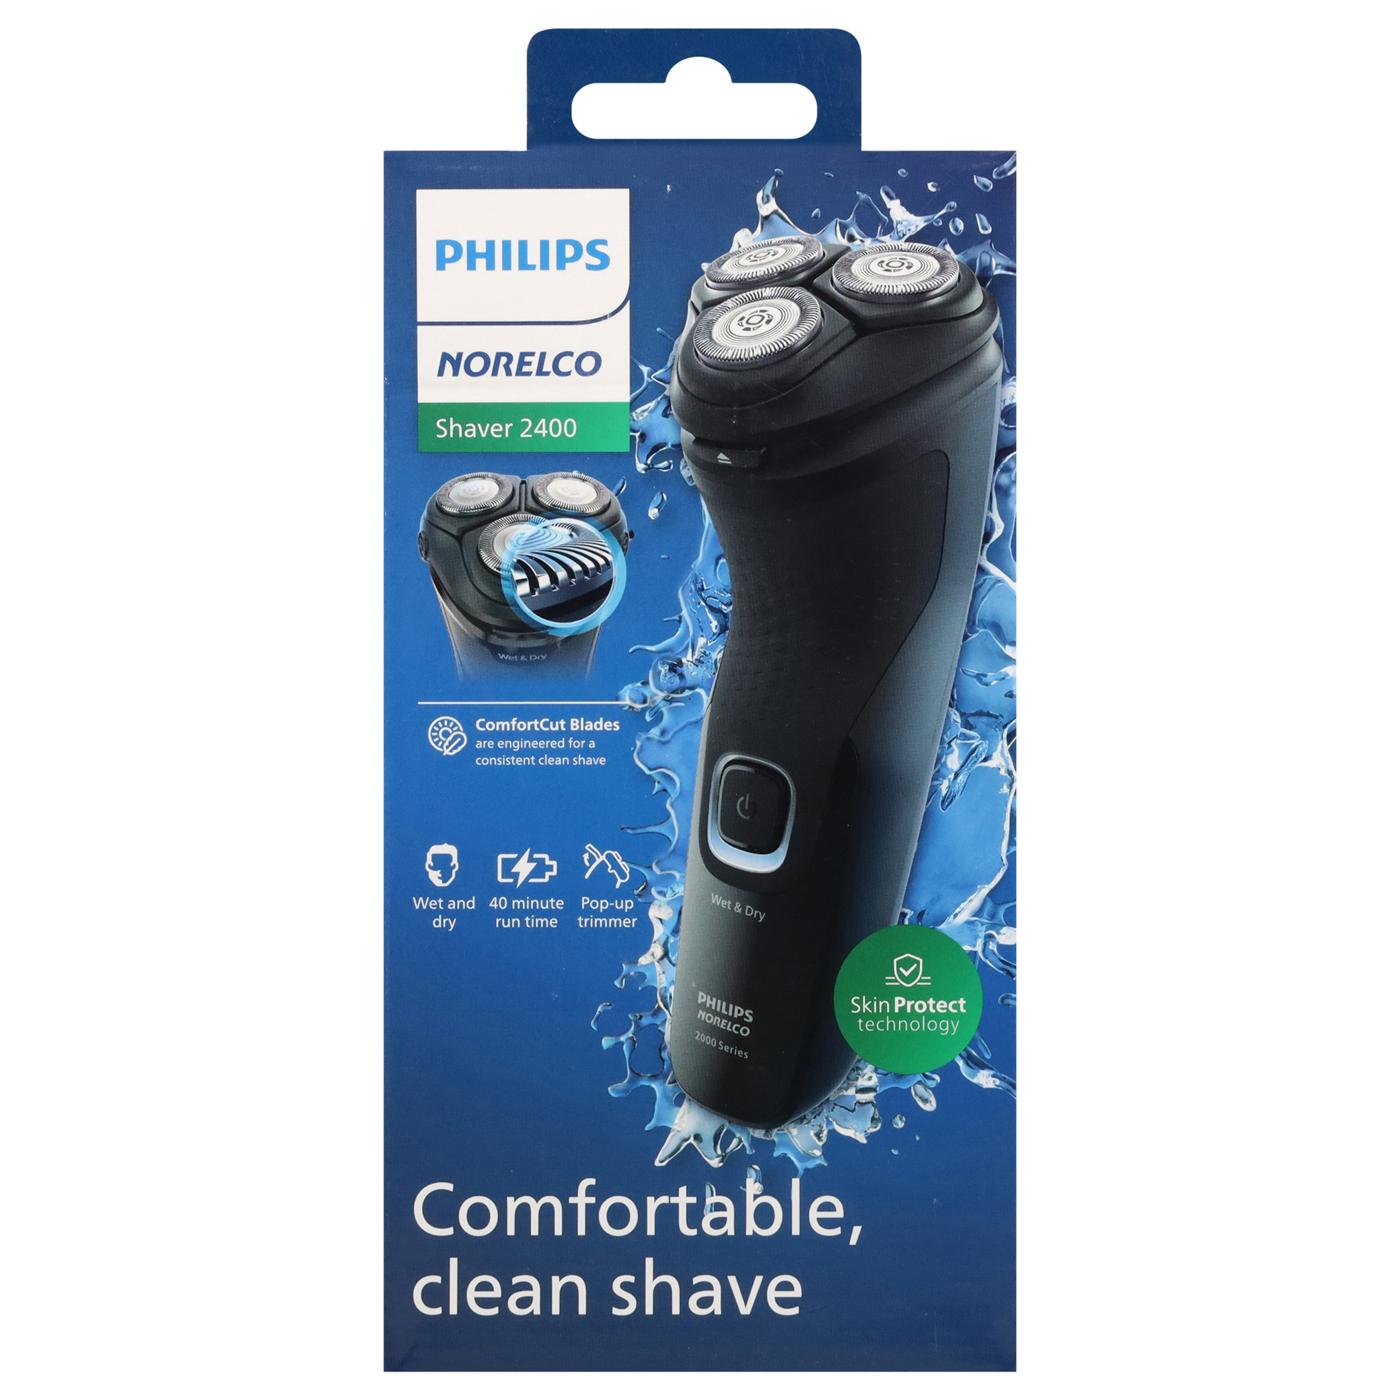 Philips Norelco Electric Rechargeable Shaver 2400; image 1 of 2